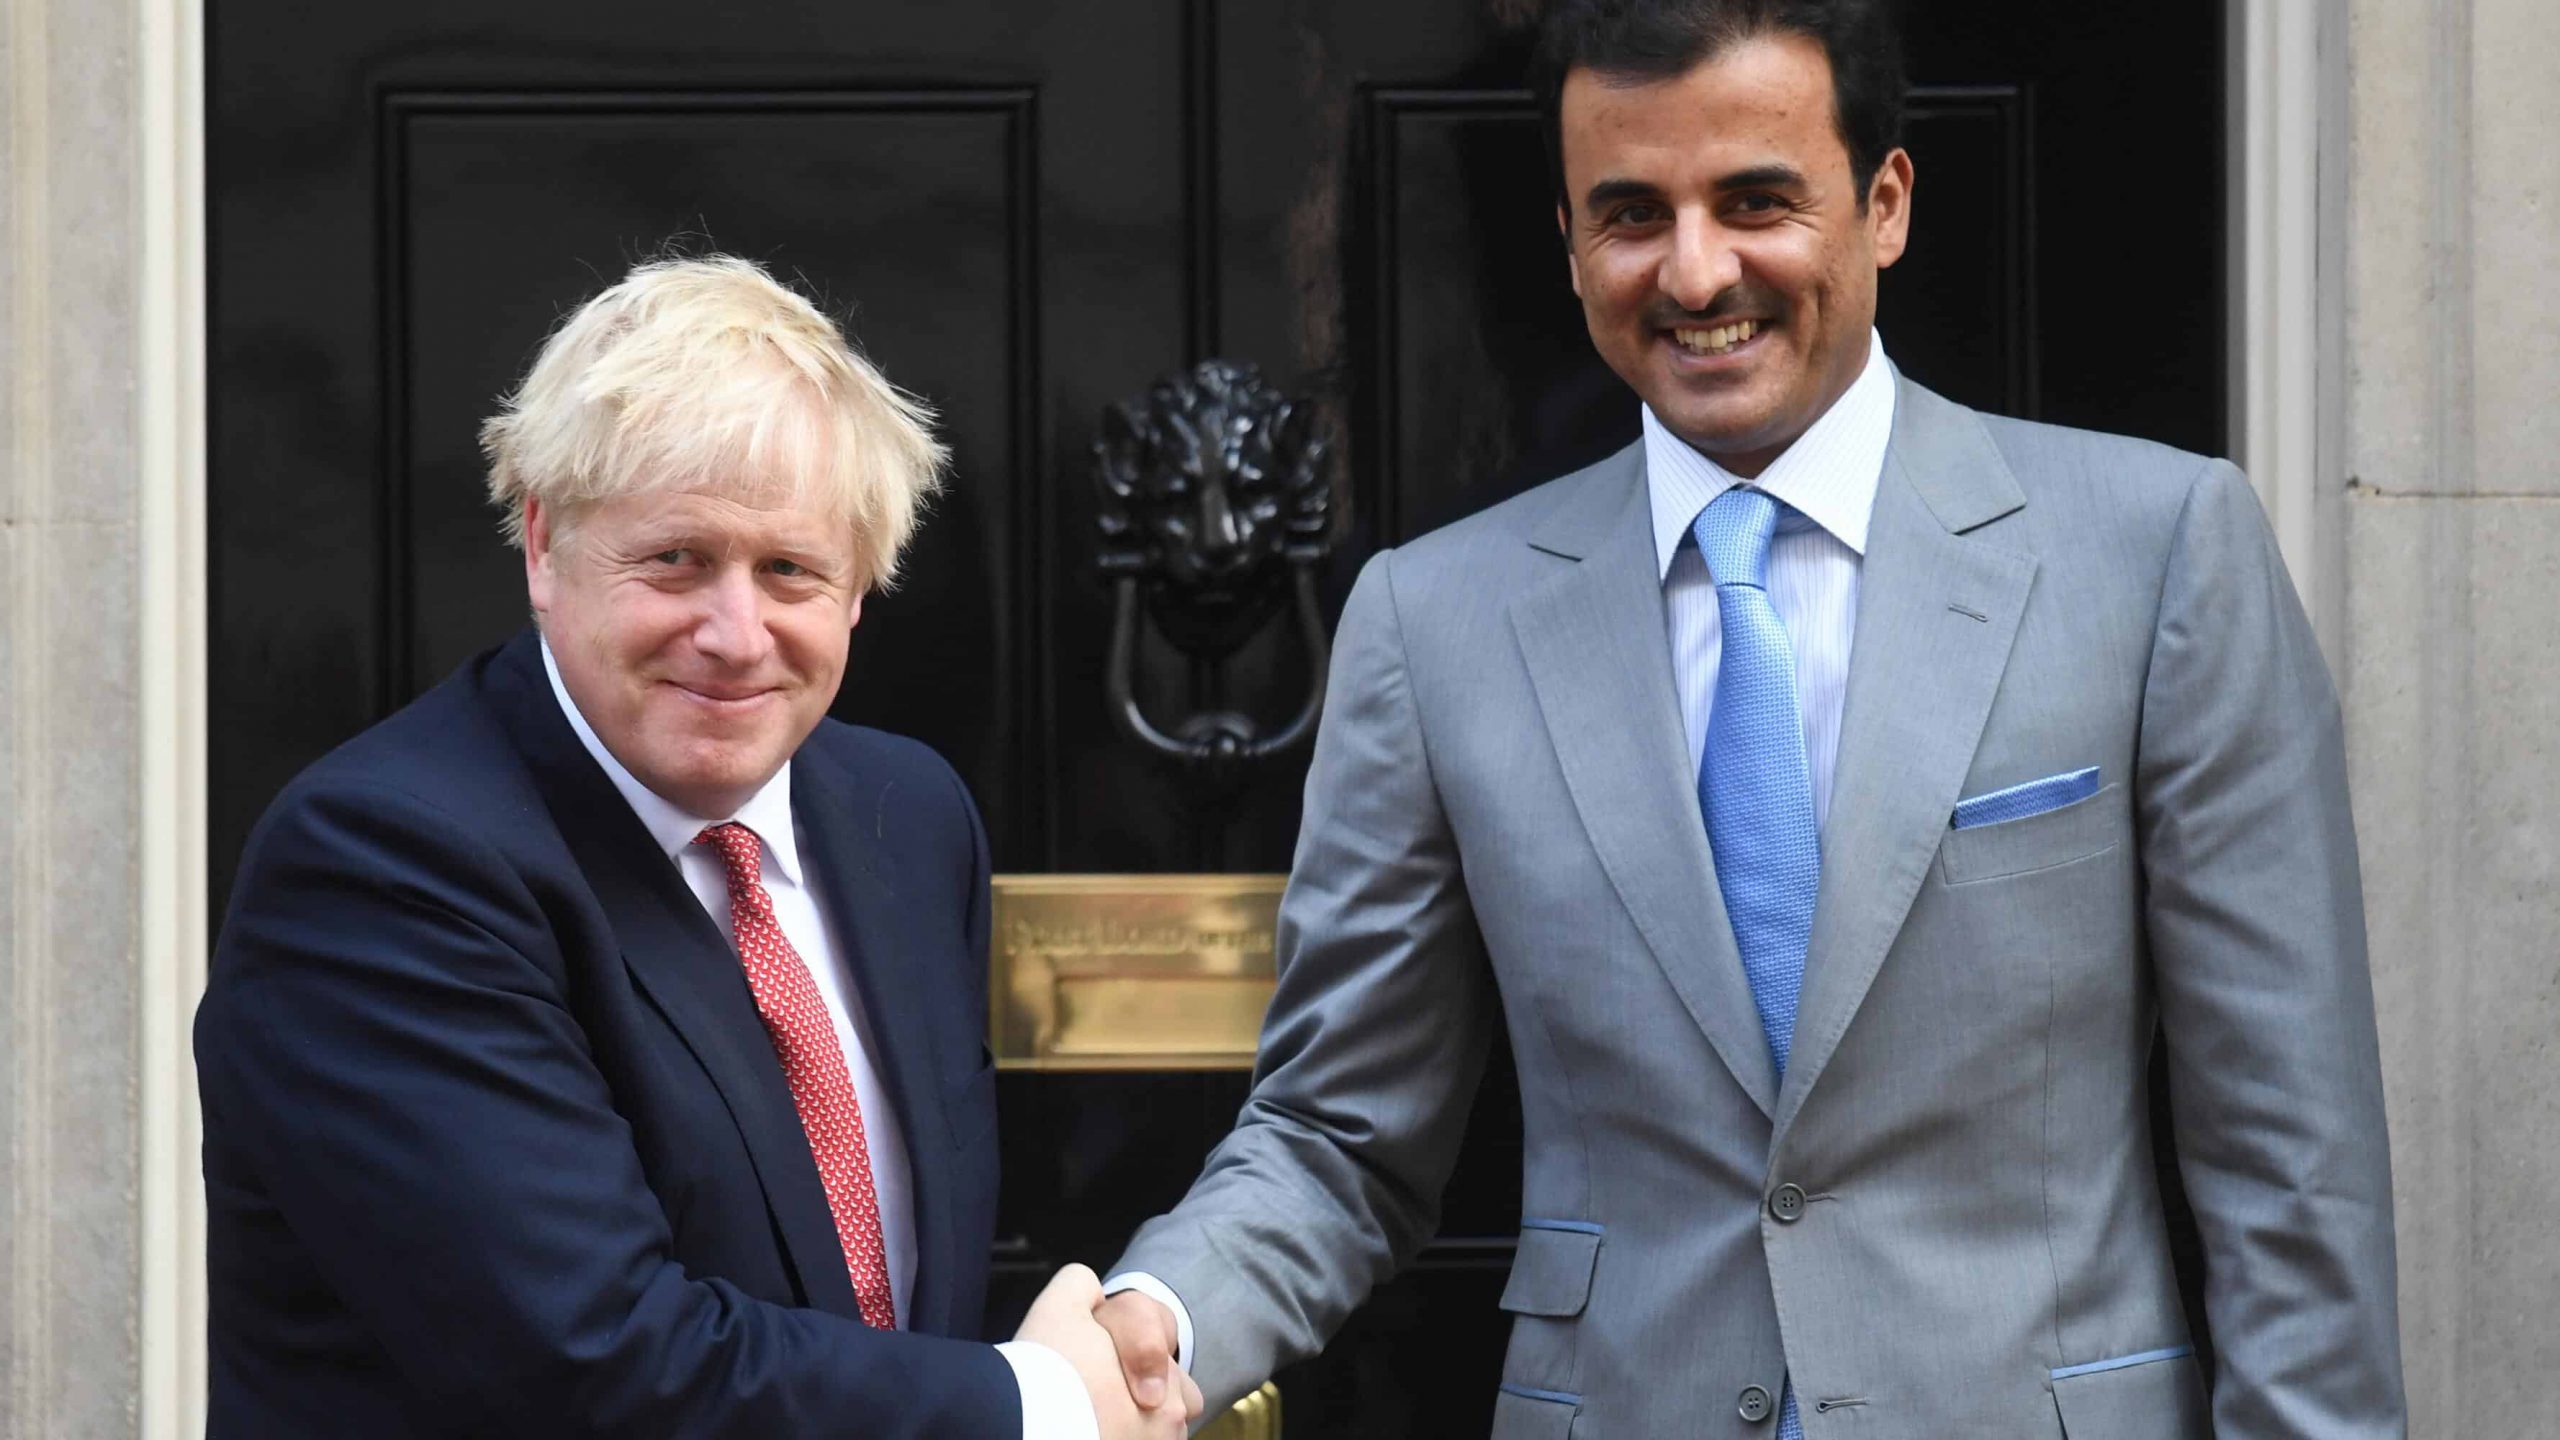 UK’s relationship with Qatar ‘going from strength to strength’